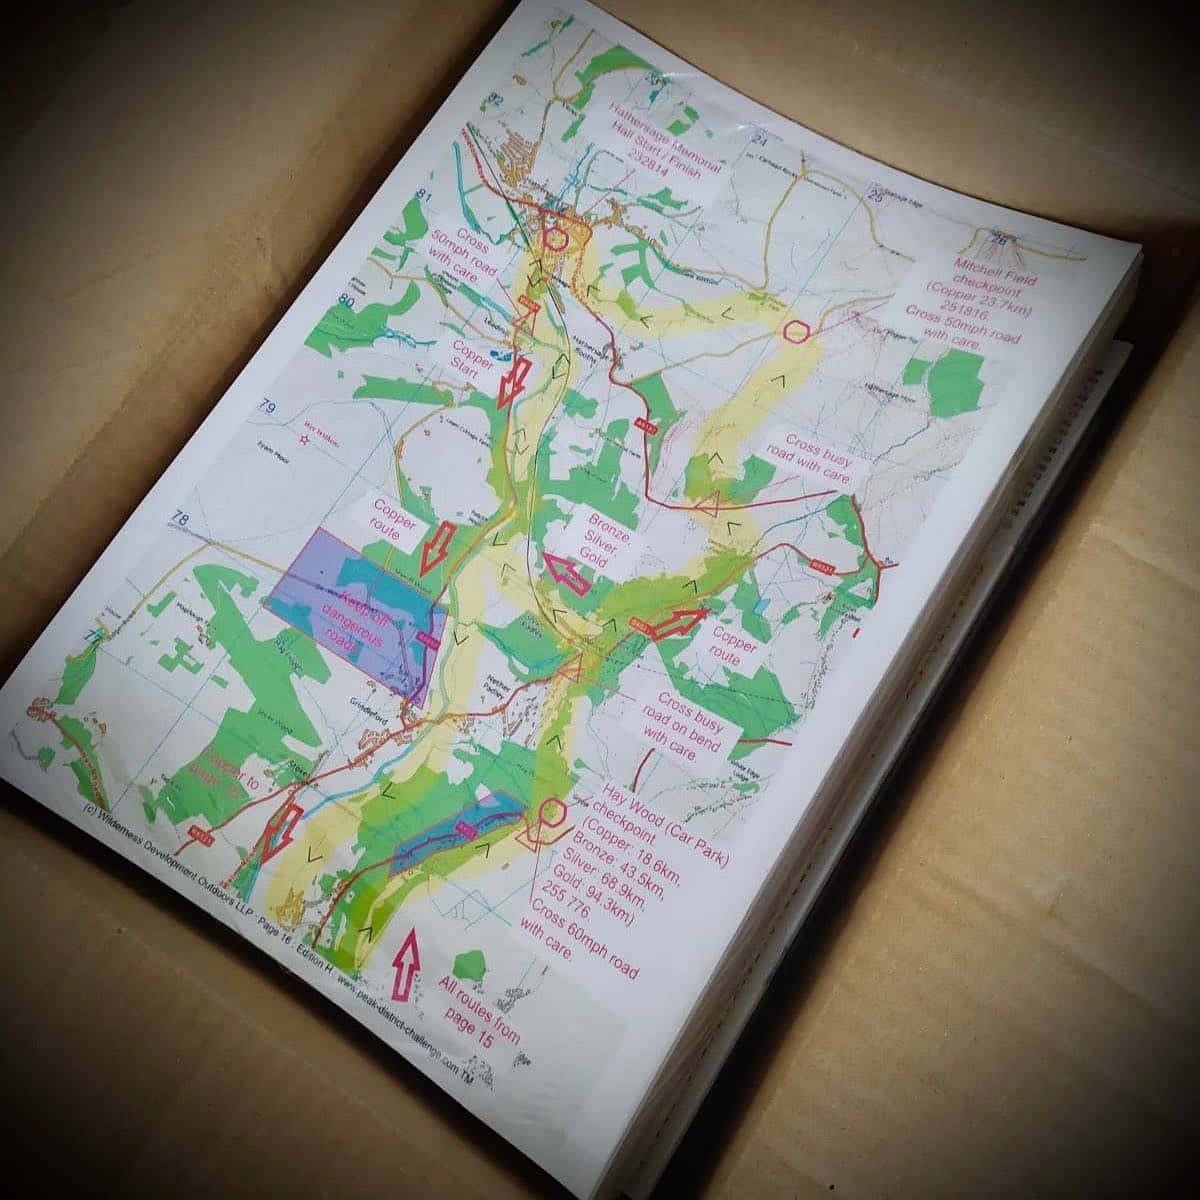 Your route guides have arrived this morning! Just a week to go! 

The guides were delayed arrivin...